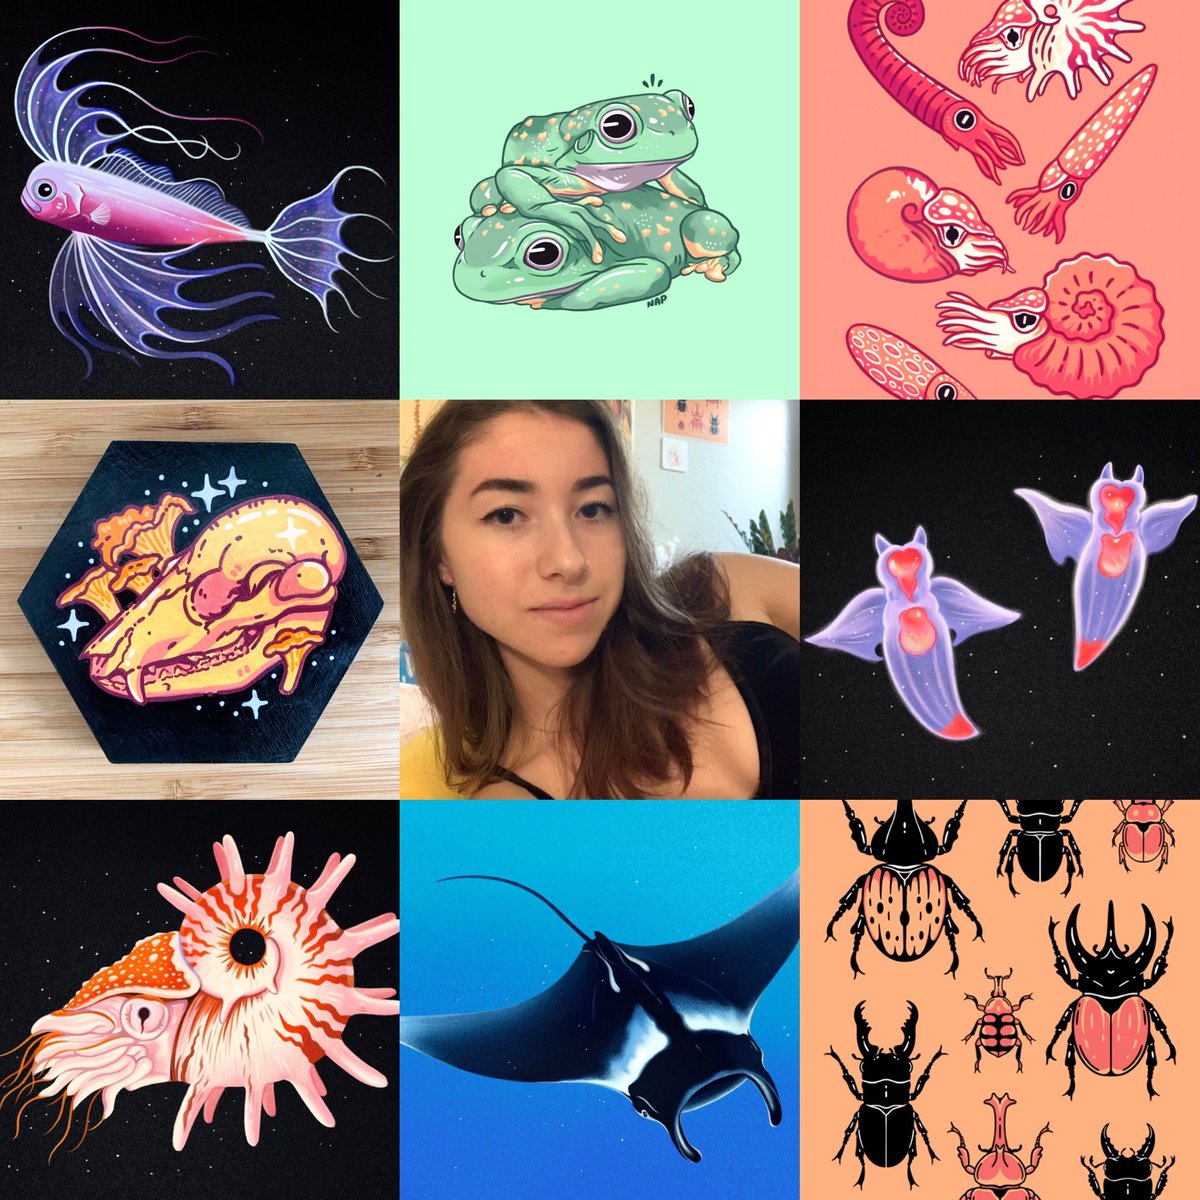 This was honestly a very mentally difficult year, but a lot of good happened too and I made some art I am proud of along the way 💖
#artvsartist2021 